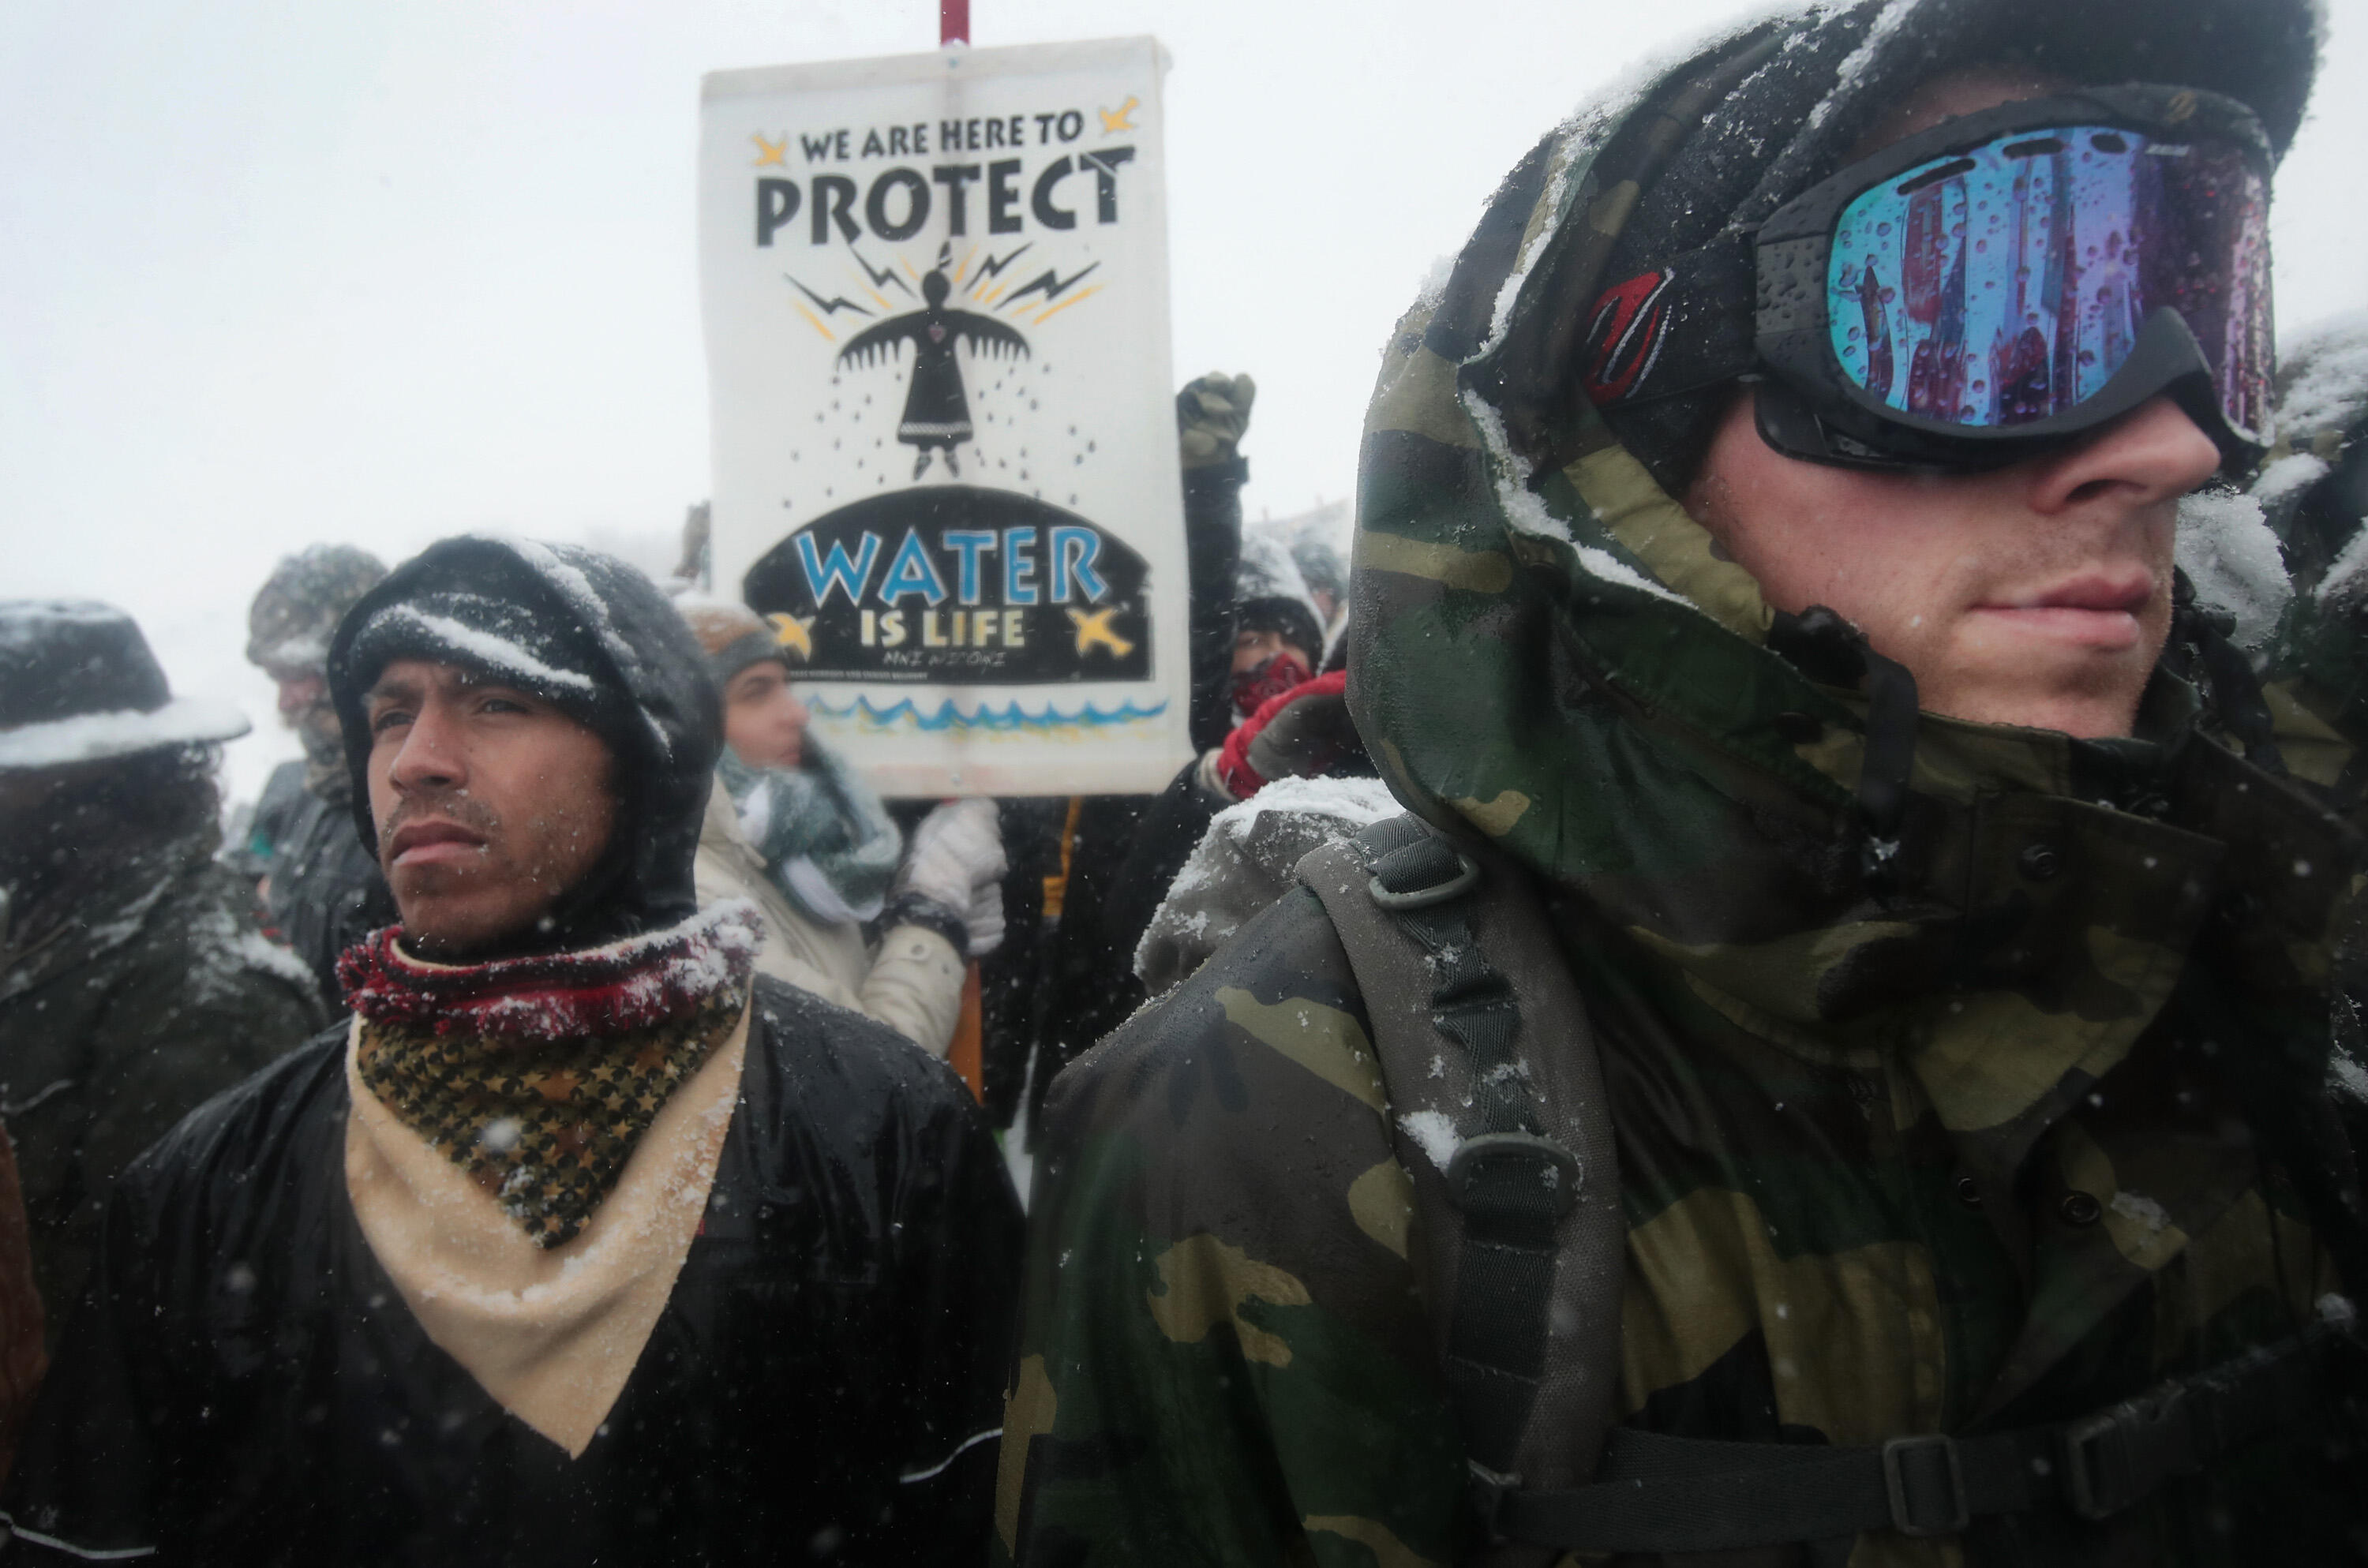 CANNON BALL, ND - DECEMBER 05:  Despite blizzard conditions, military veterans march in support of the 